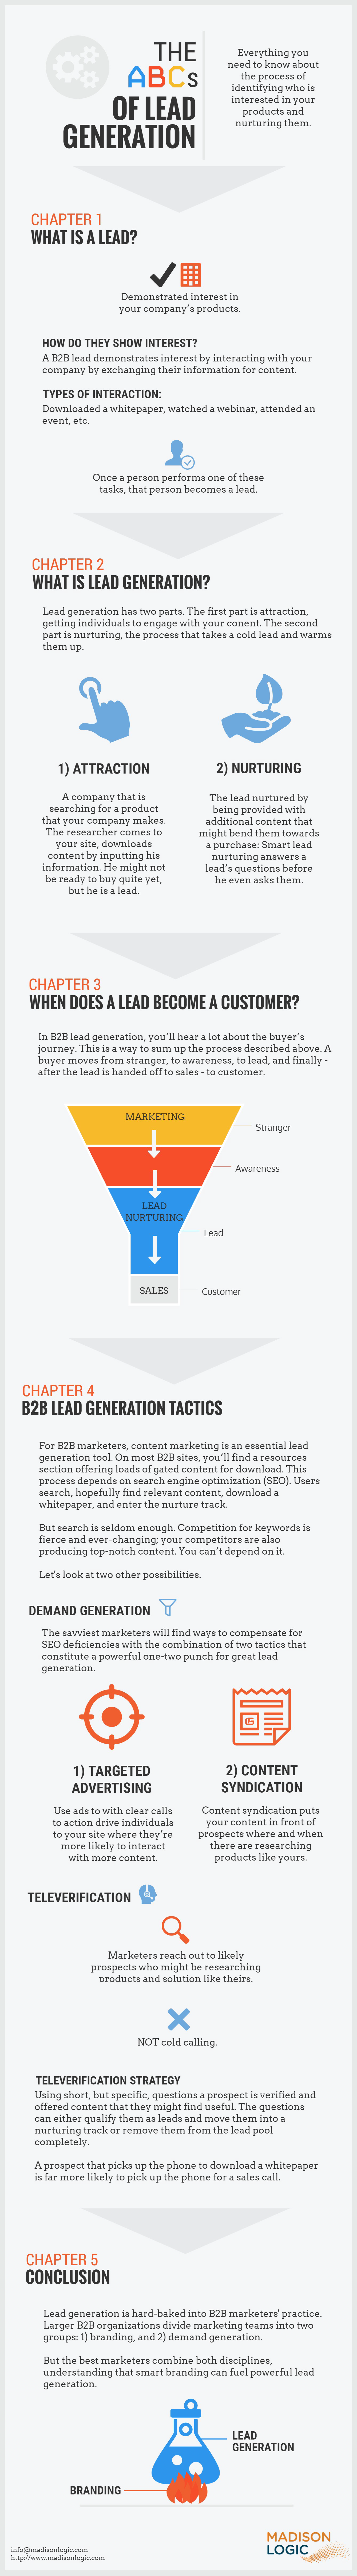 Infographic of the ABCs of Lead Generation